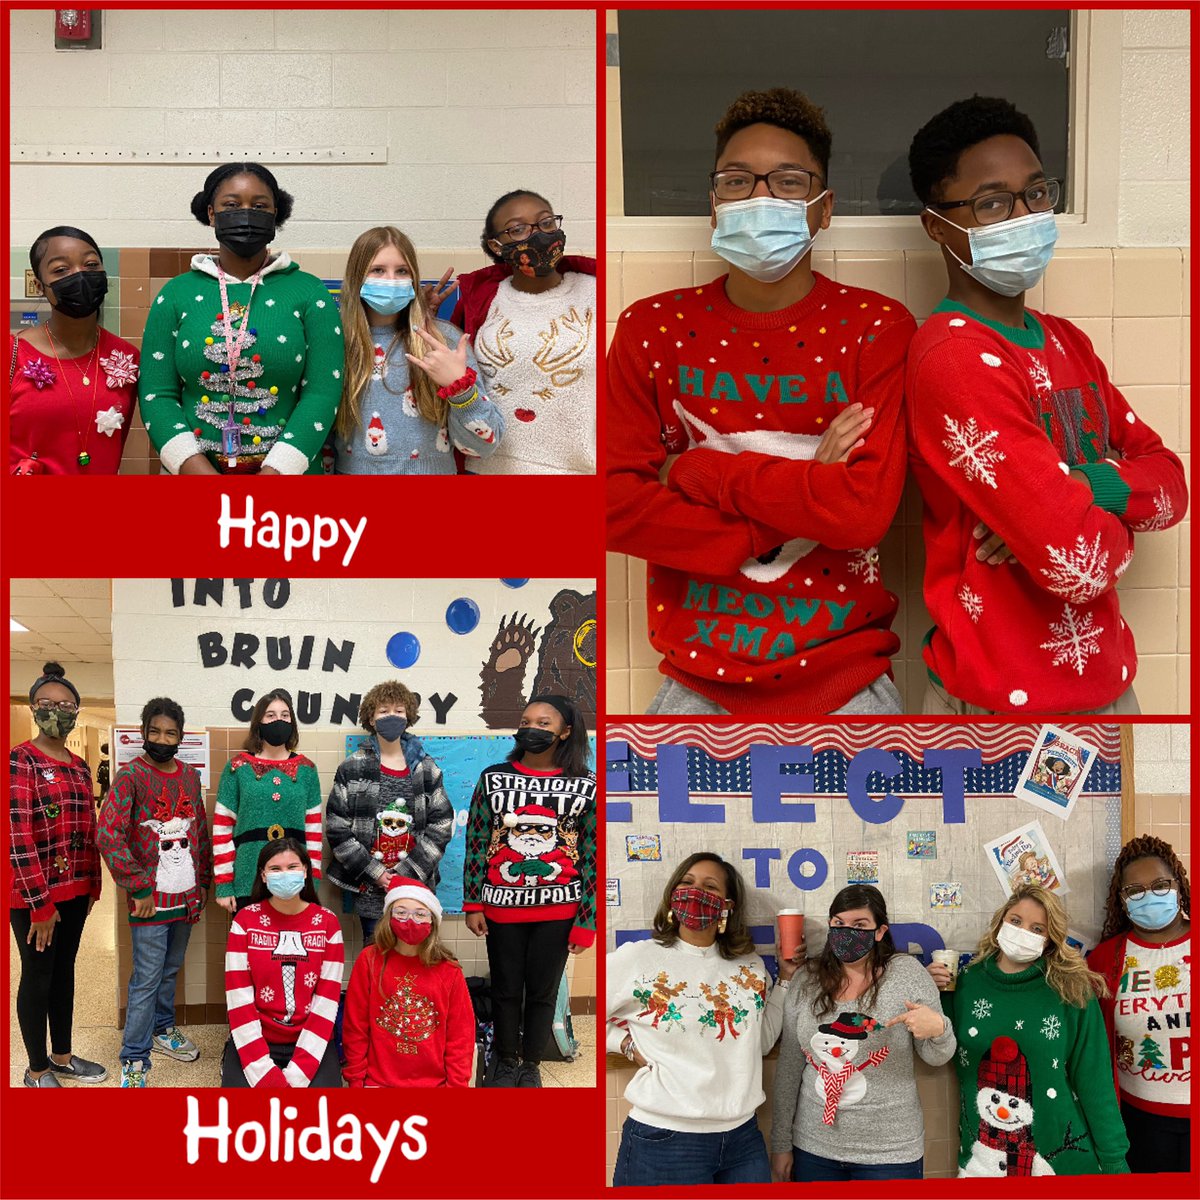 Bruins loved showing their holiday spirit on “Ugly Christmas Sweater Day” #holidayspiritweek #sca #bruinspirit